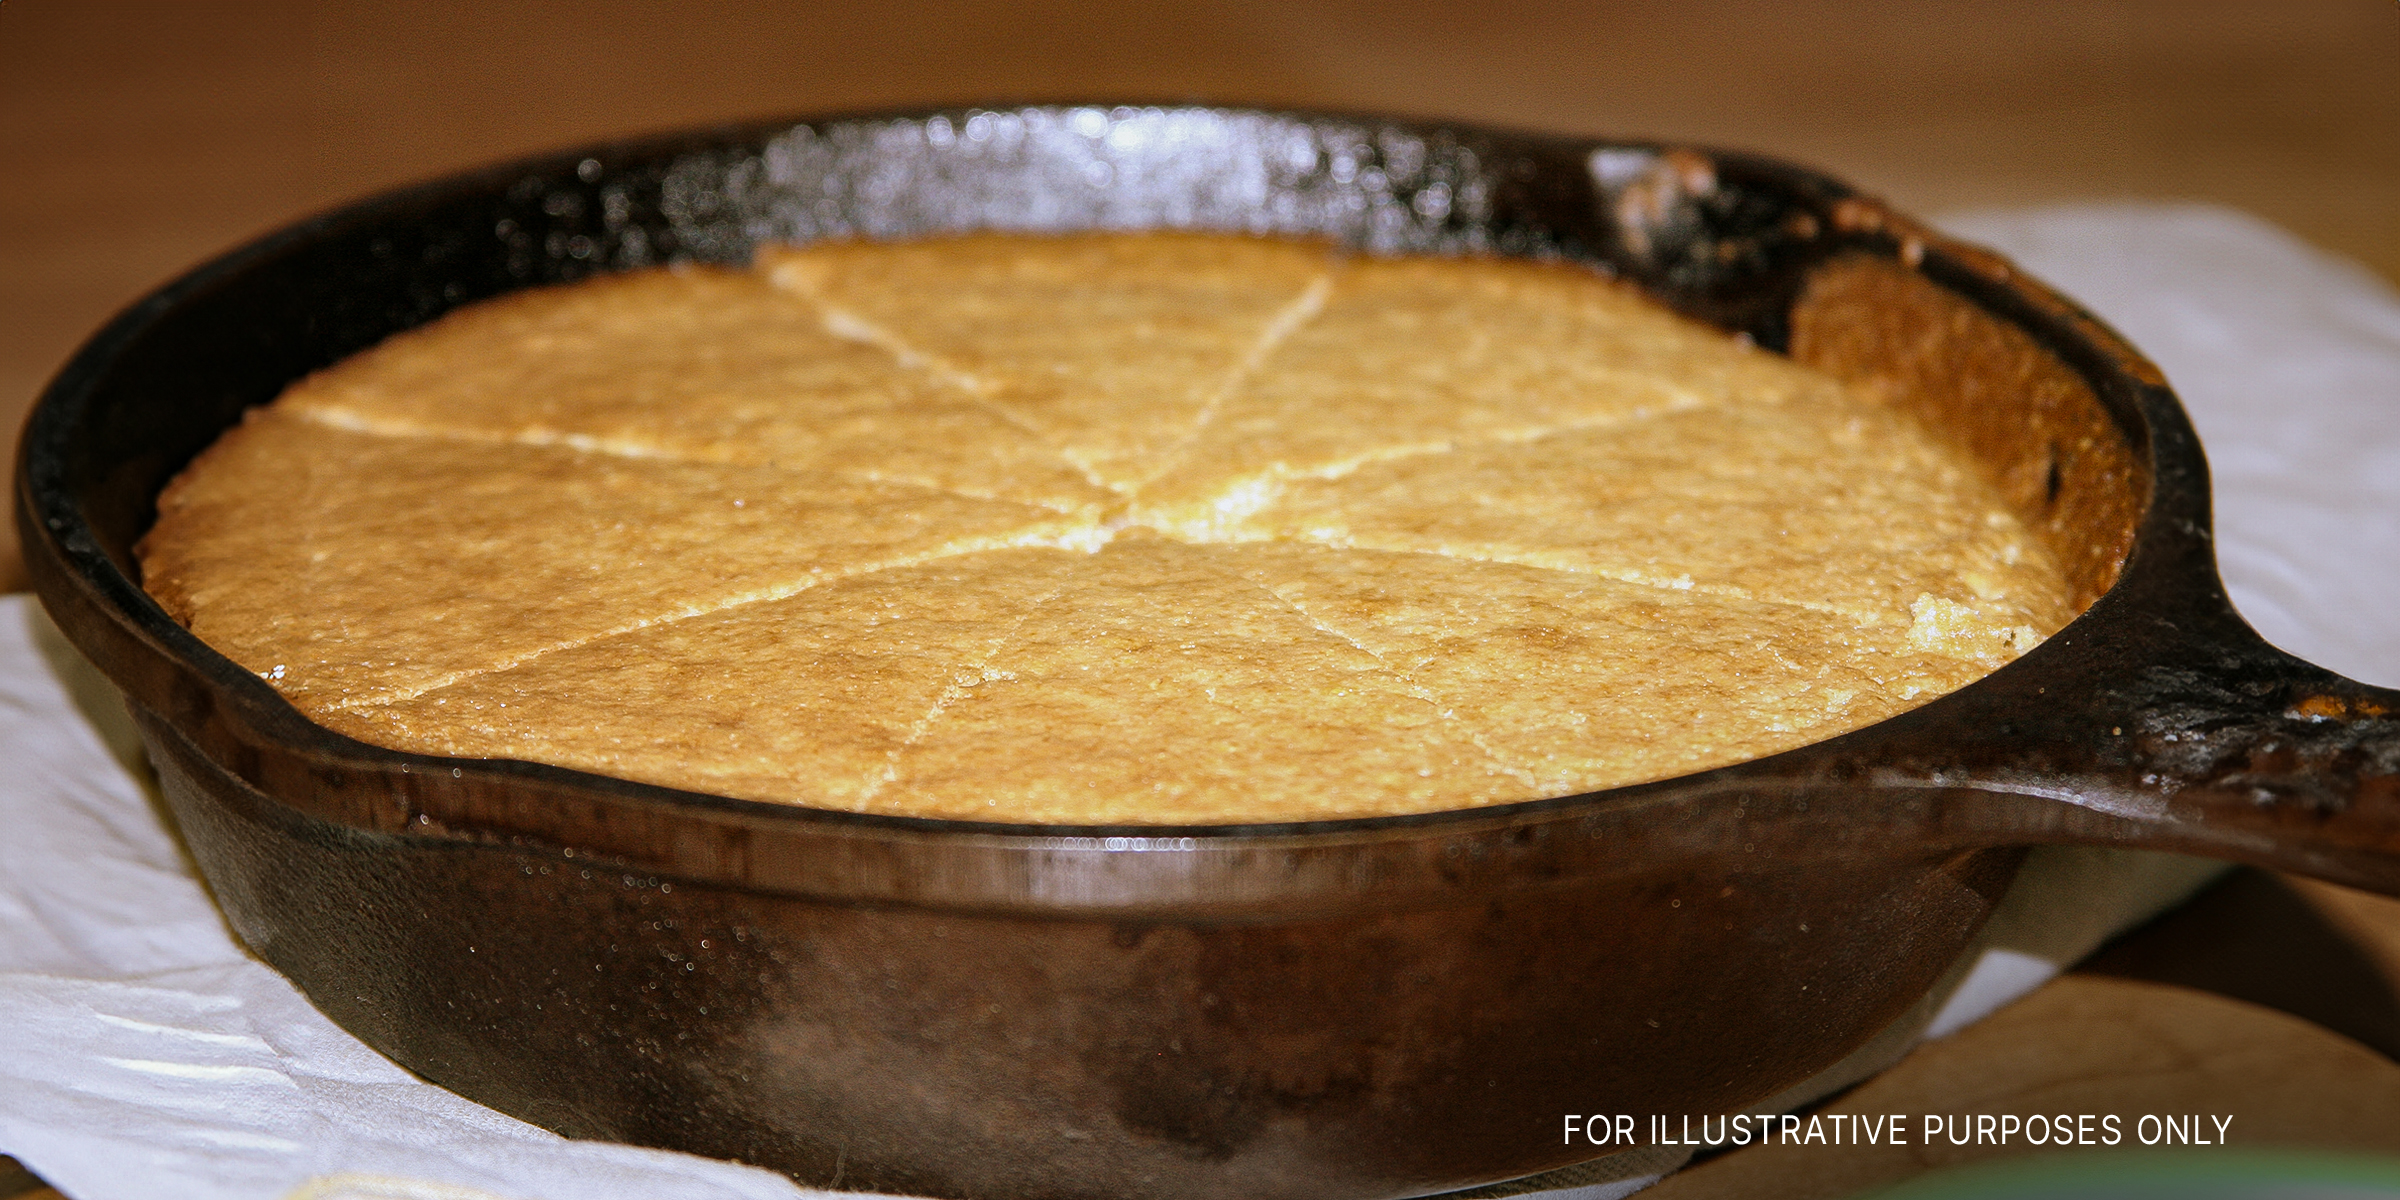 A pan with cornbread | Source: Flickr